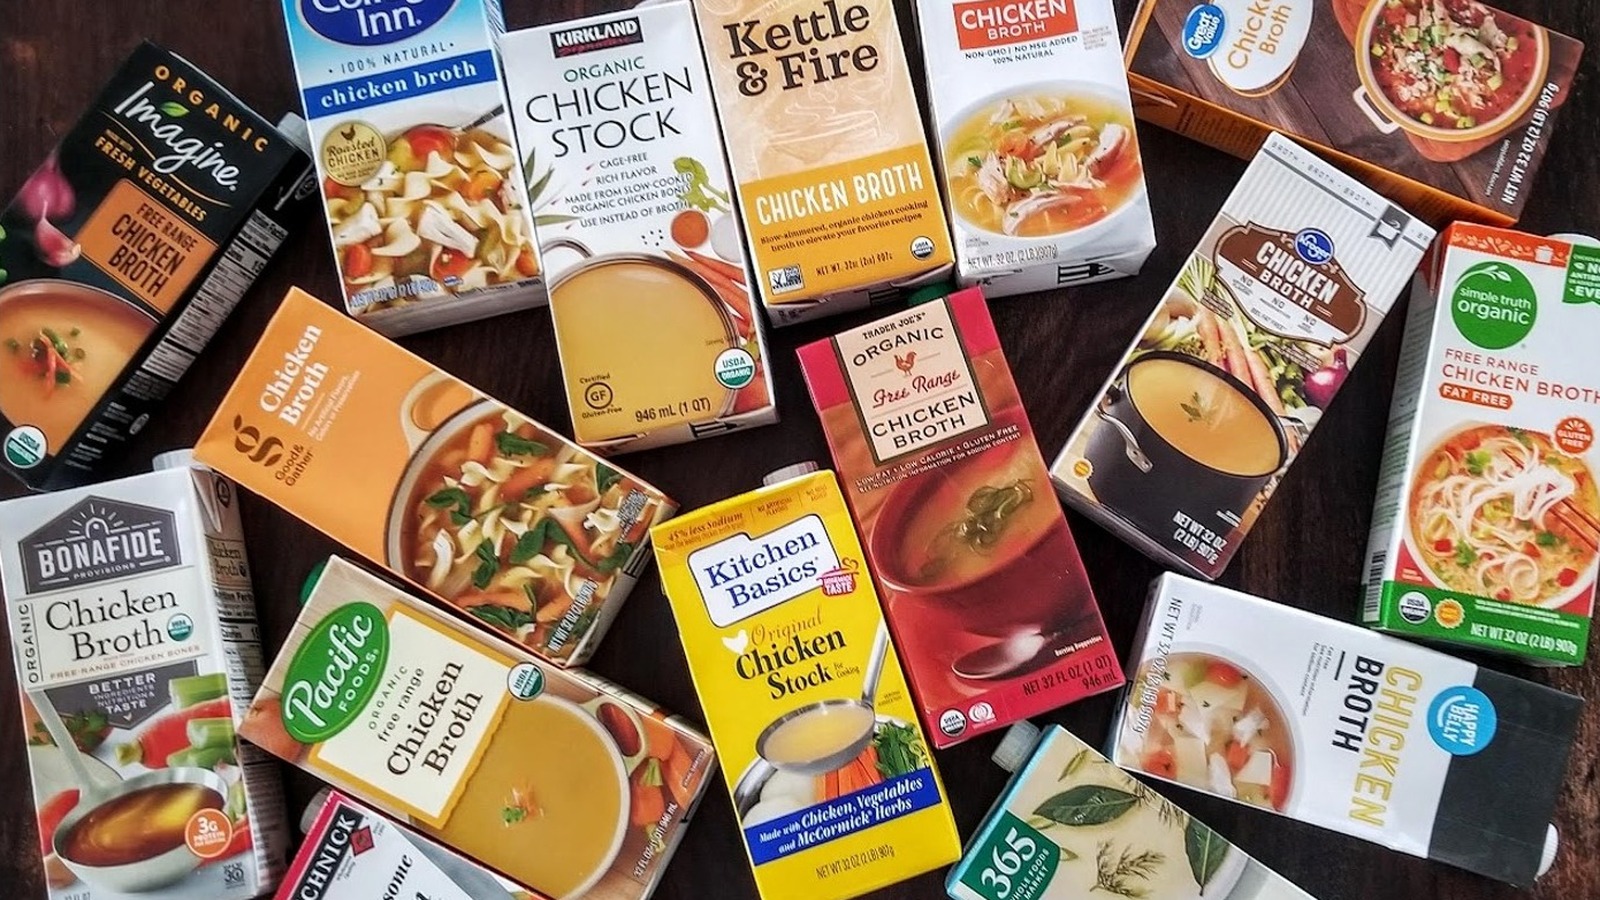 Seafood Stock and Broth: The Best Brands to Buy In Stores - Fearless Eating